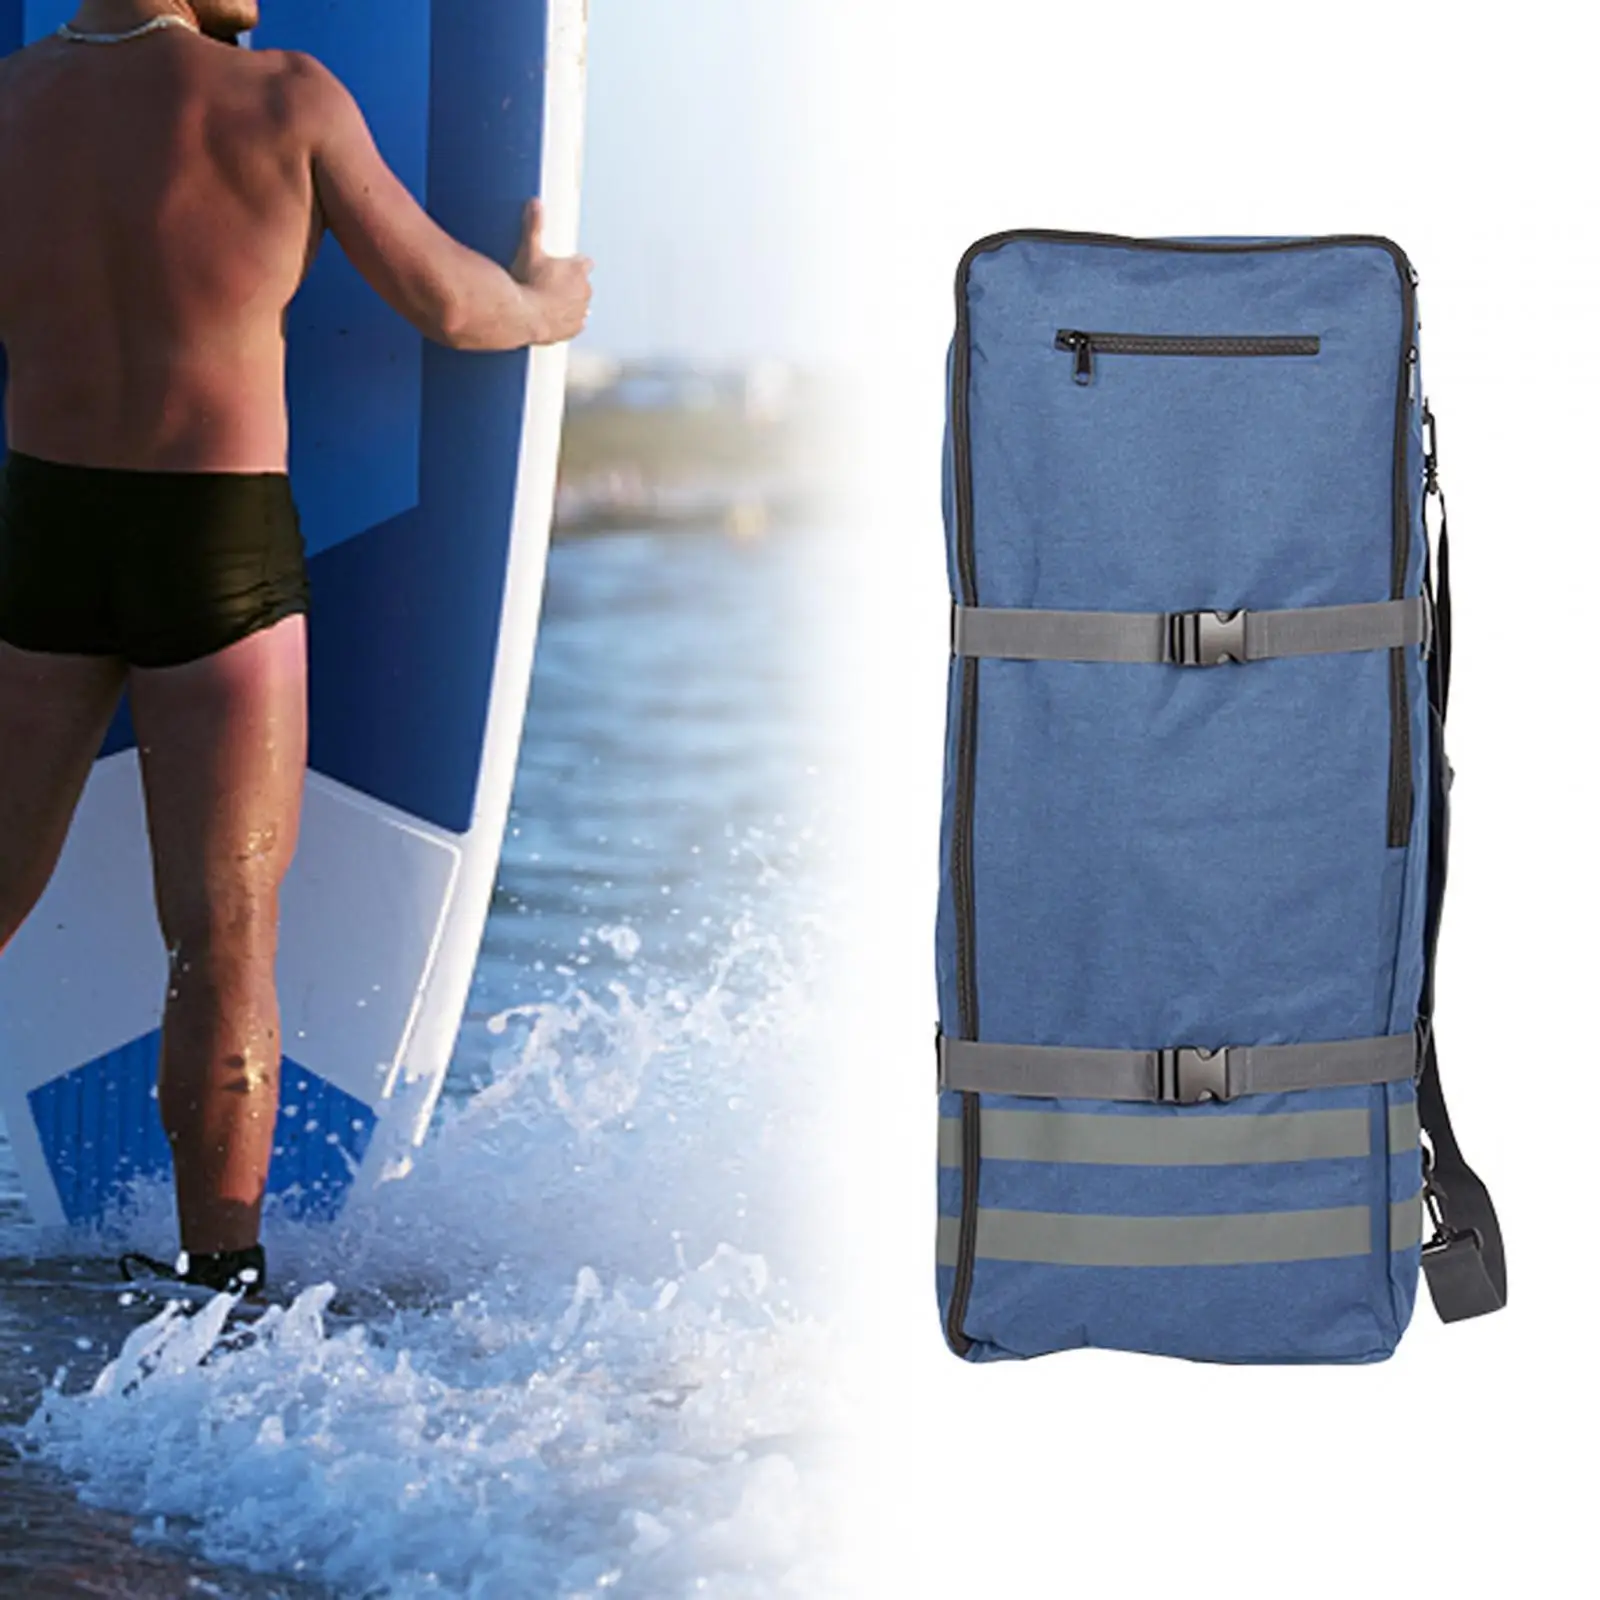 Paddle Board Travel Bag Backpack 90x36x26cm Accessories Padded Adjustable Straps